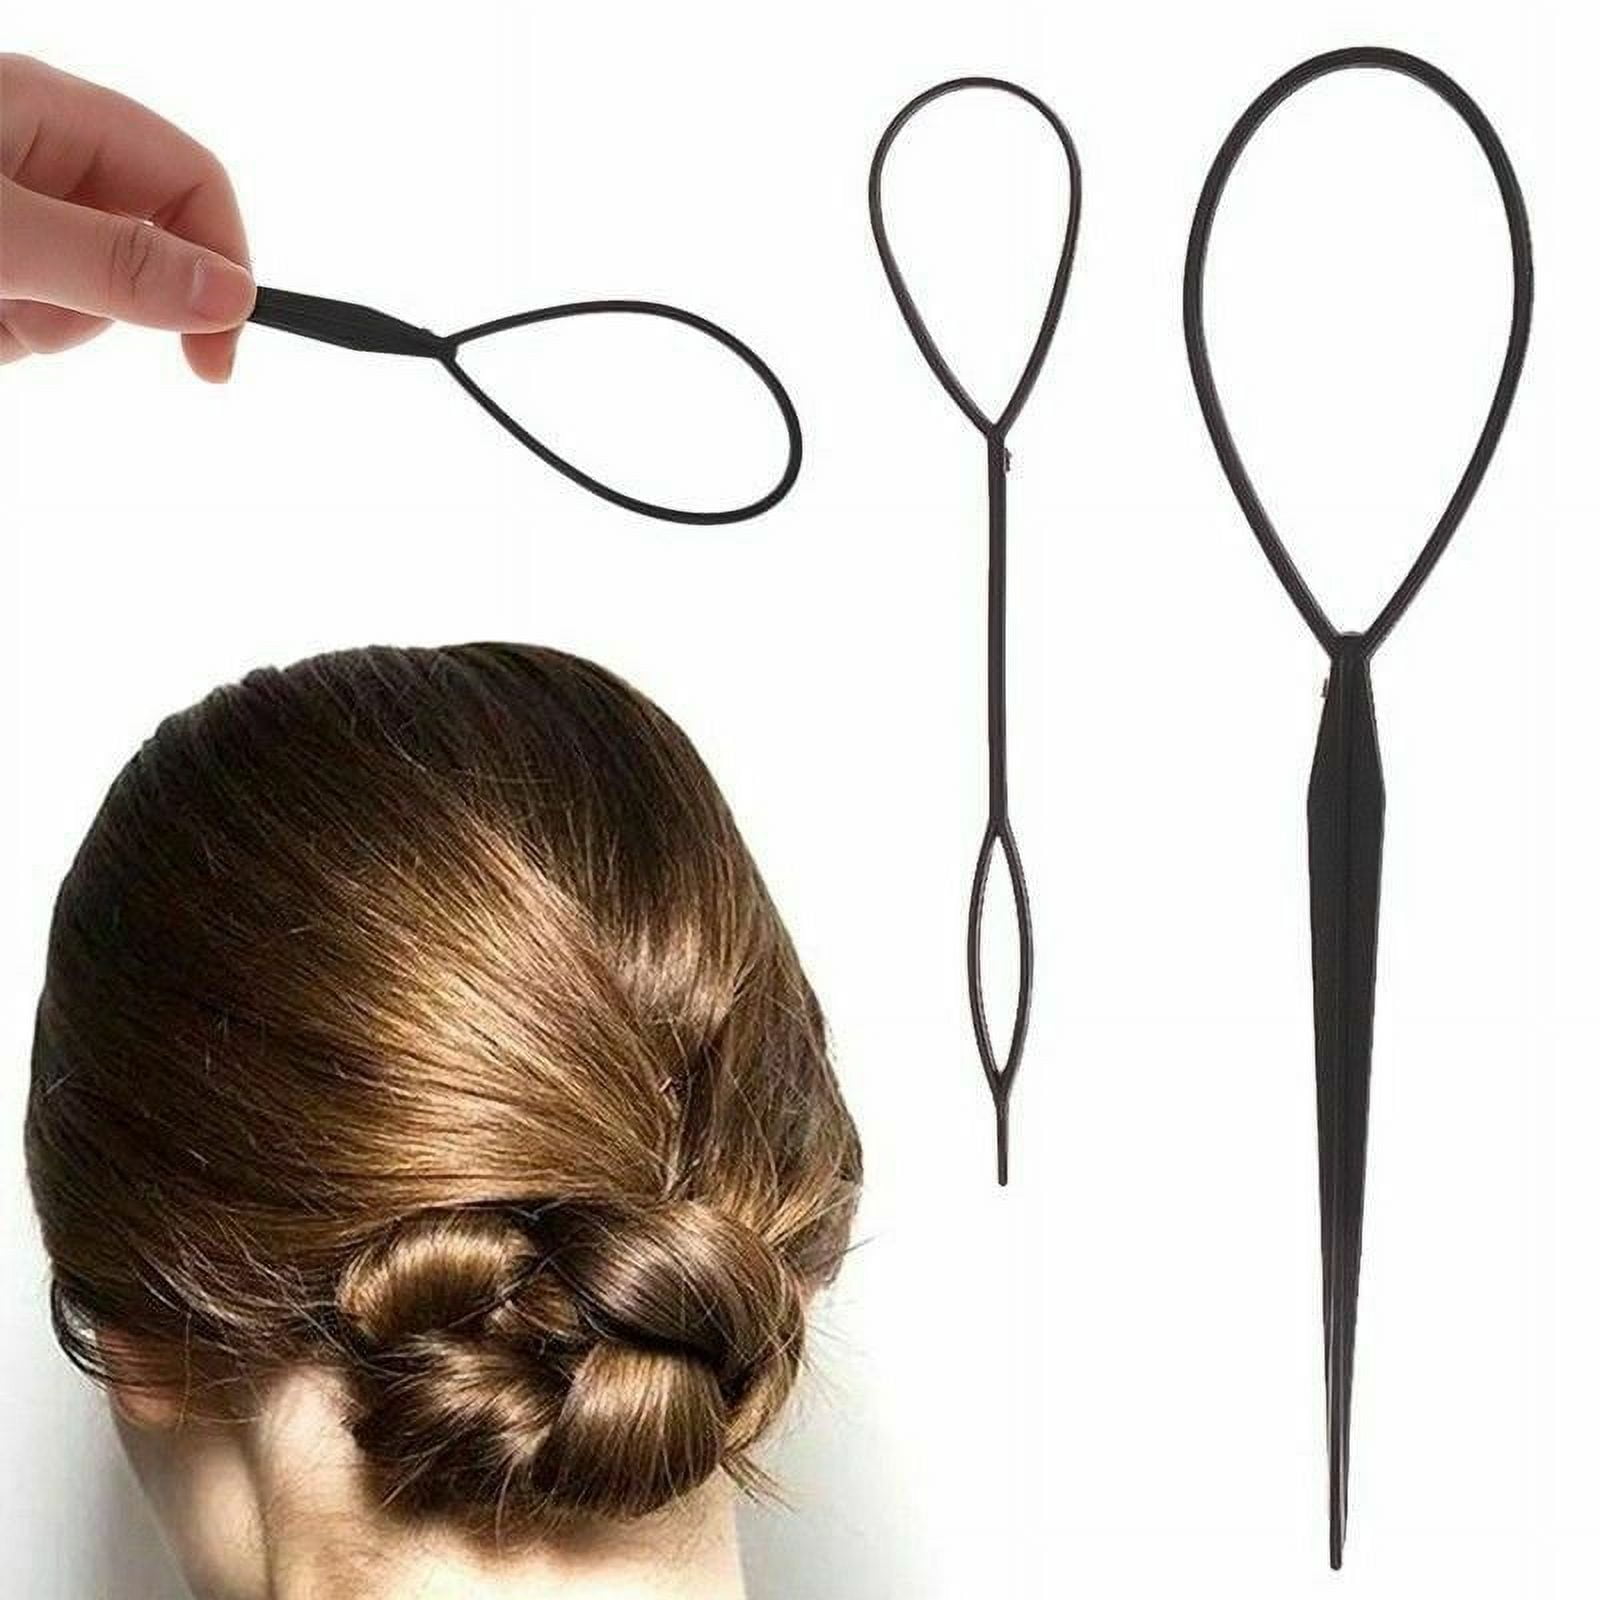 Quick Beader for Loading Beads/Automatic Hair Beader and Styling  Kit/Plastic Magic Topsy Tail Hair Braid Ponytail Styling Maker (Black)